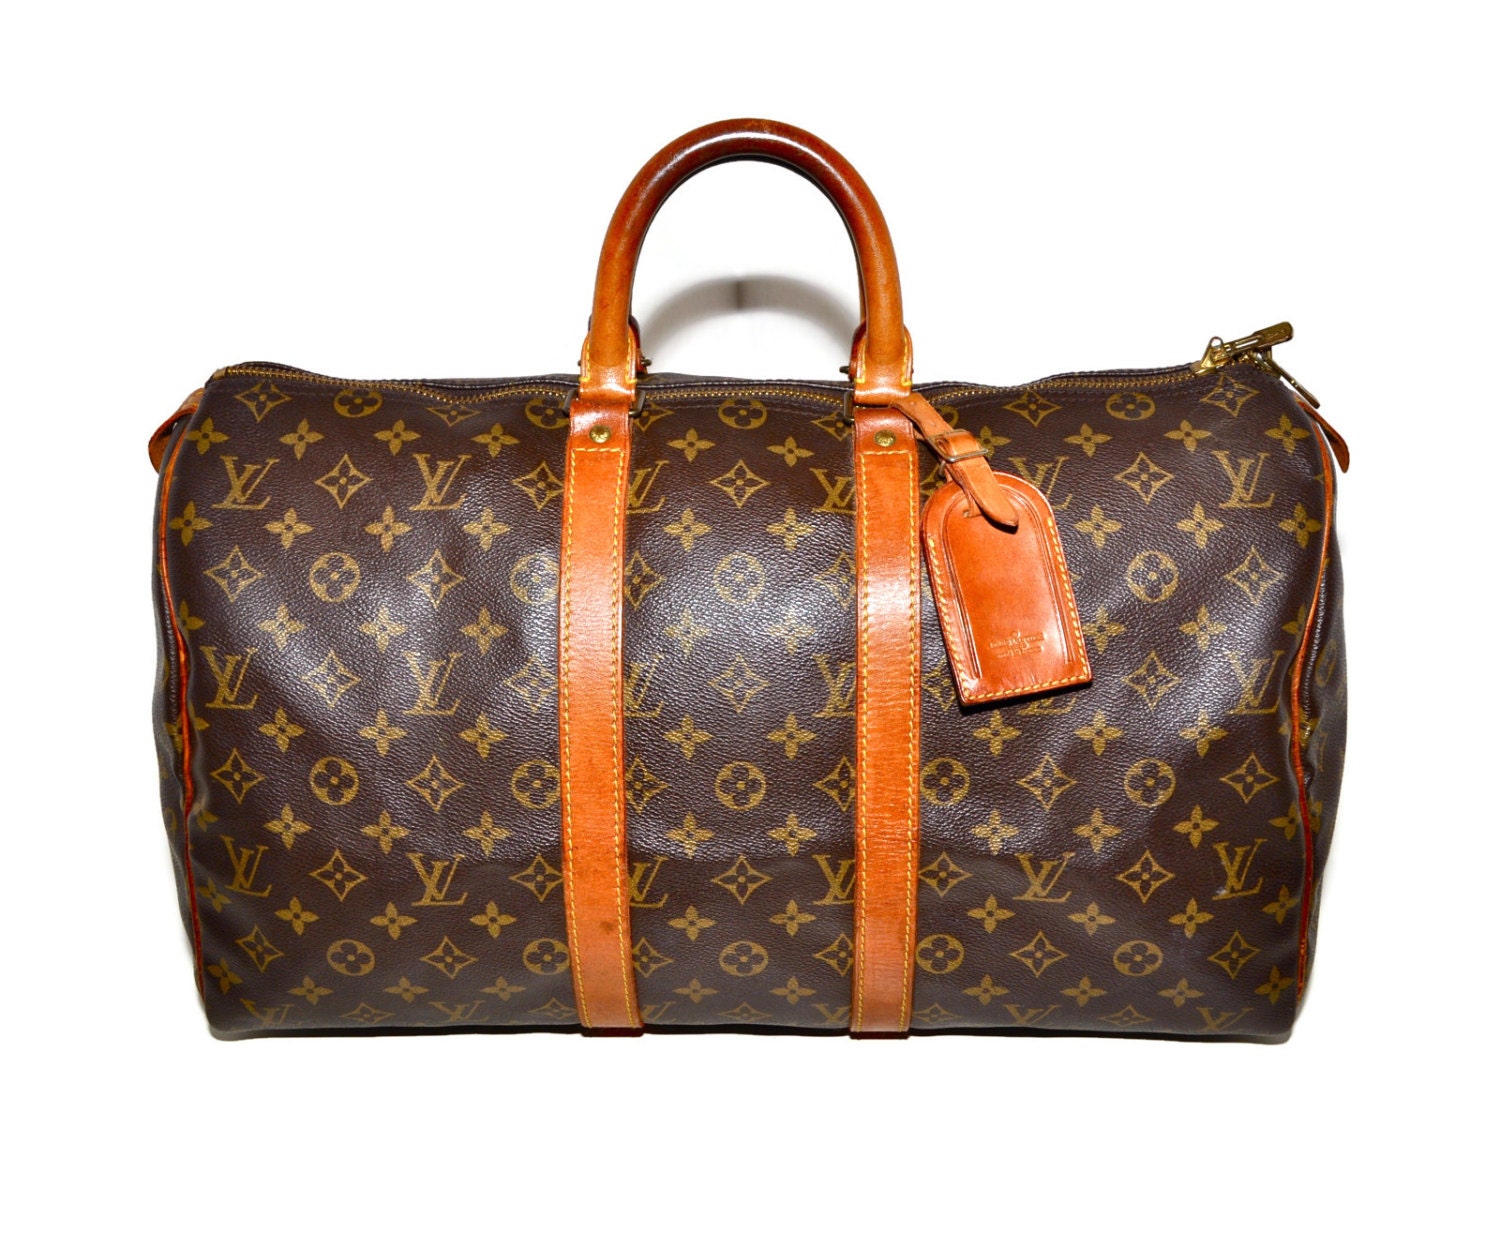 LOUIS VUITTON Keepall 45 Duffle Bag Luggage Small LV by louise49